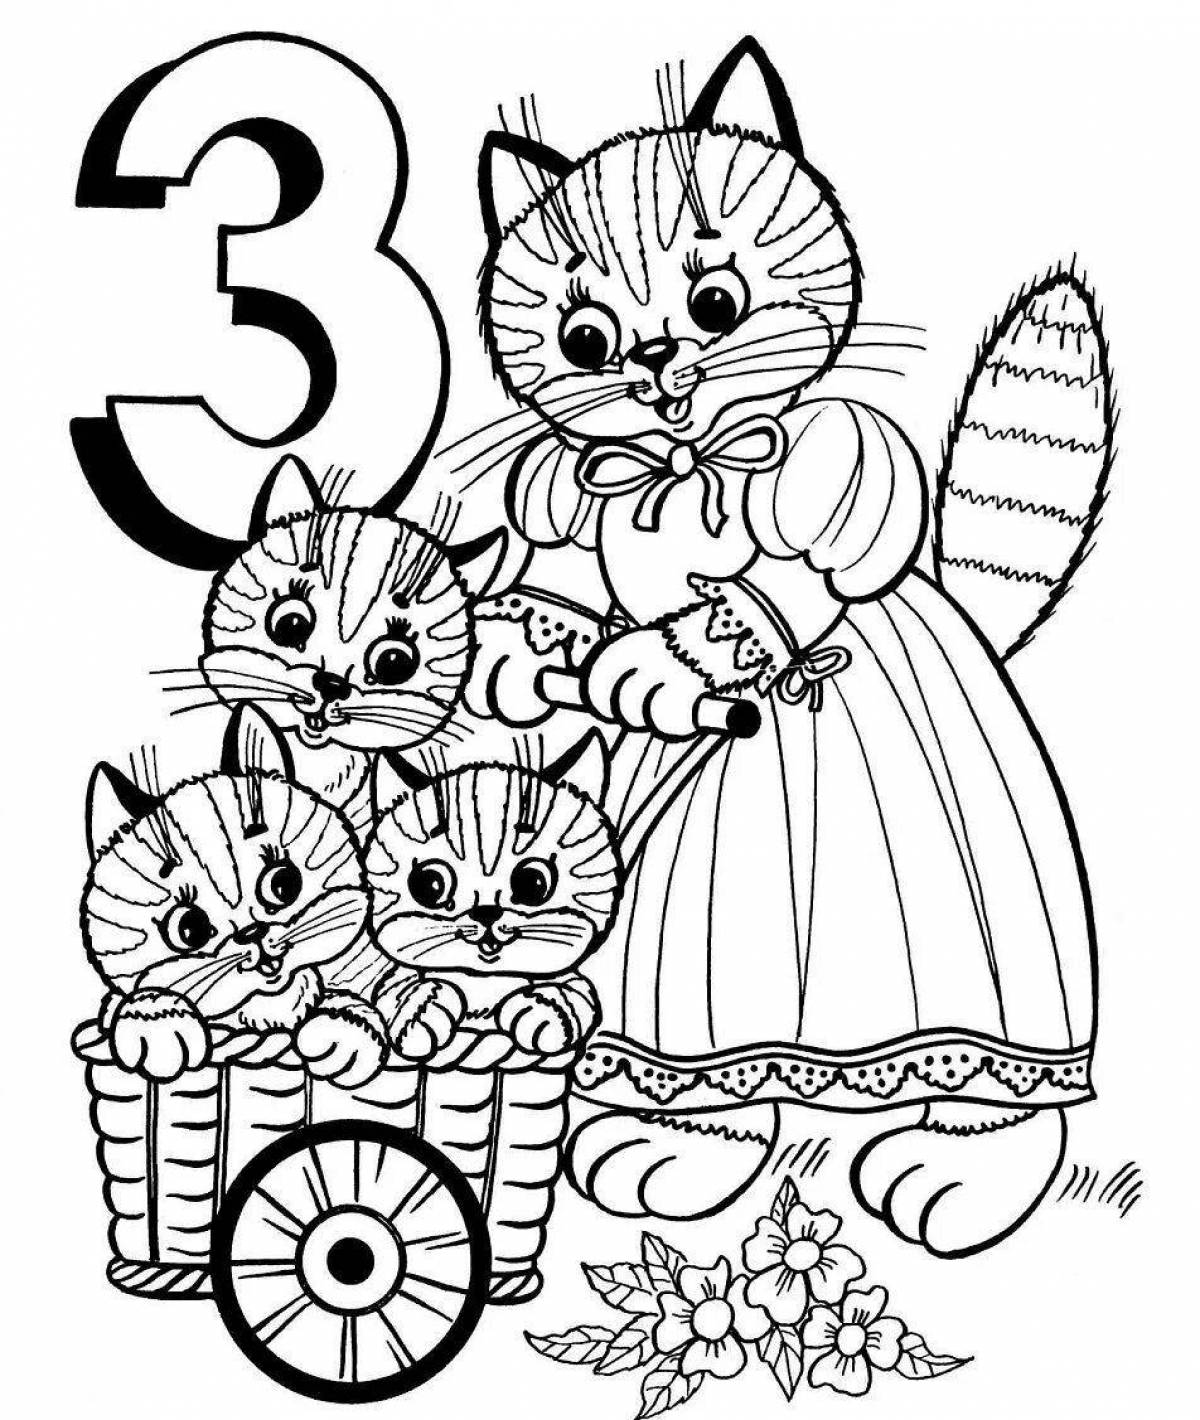 Awesome cat house coloring page for school kids